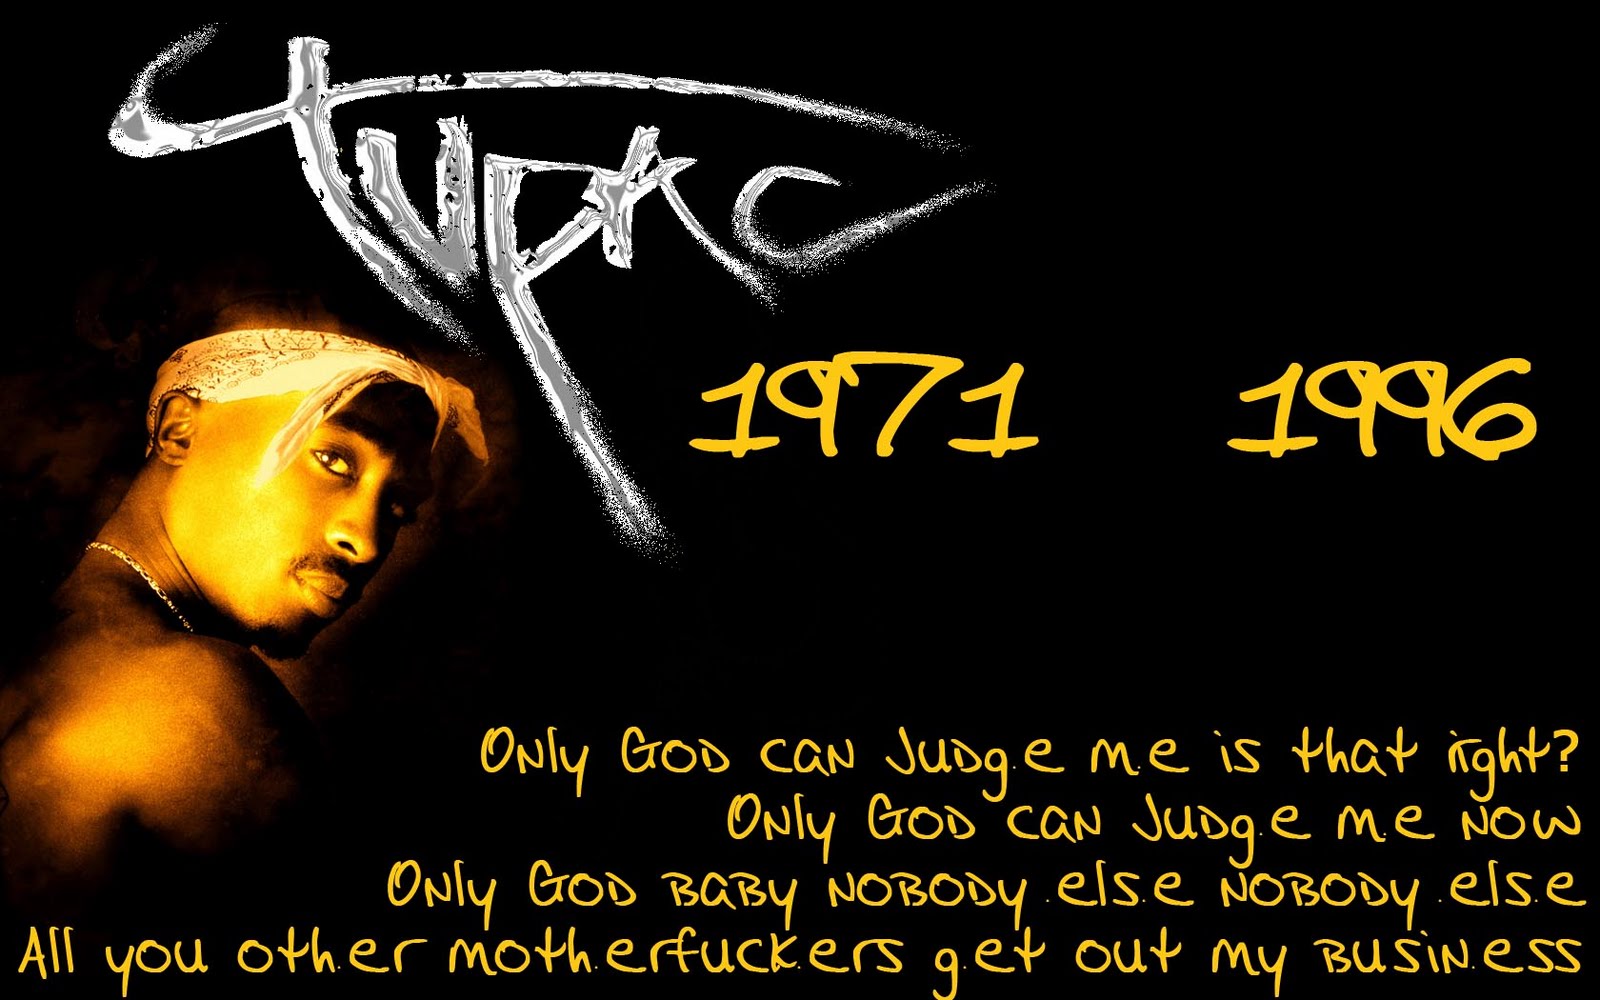 Liana Conis Blog 2pac background